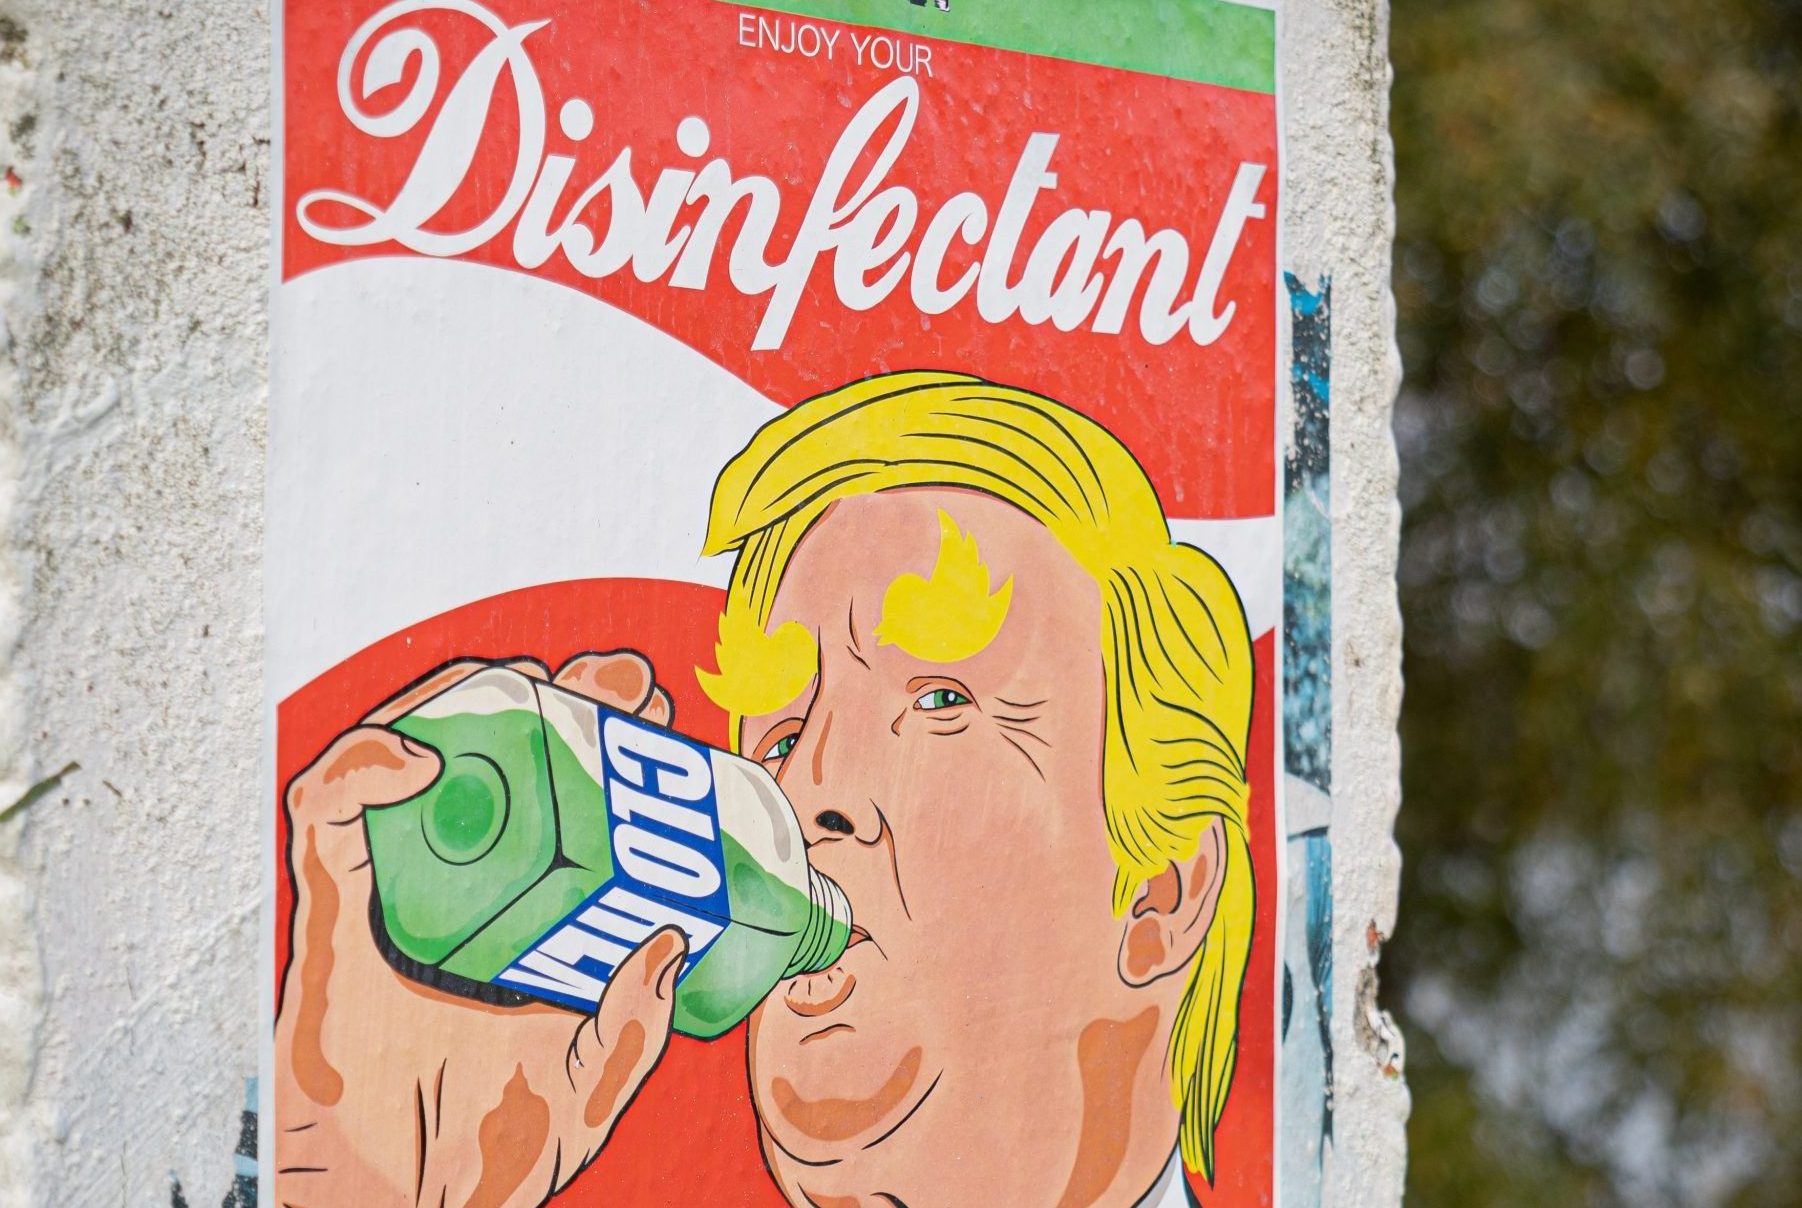 in an article about conspiracy theories a mural of former president Donald Trump drinking disenfectant